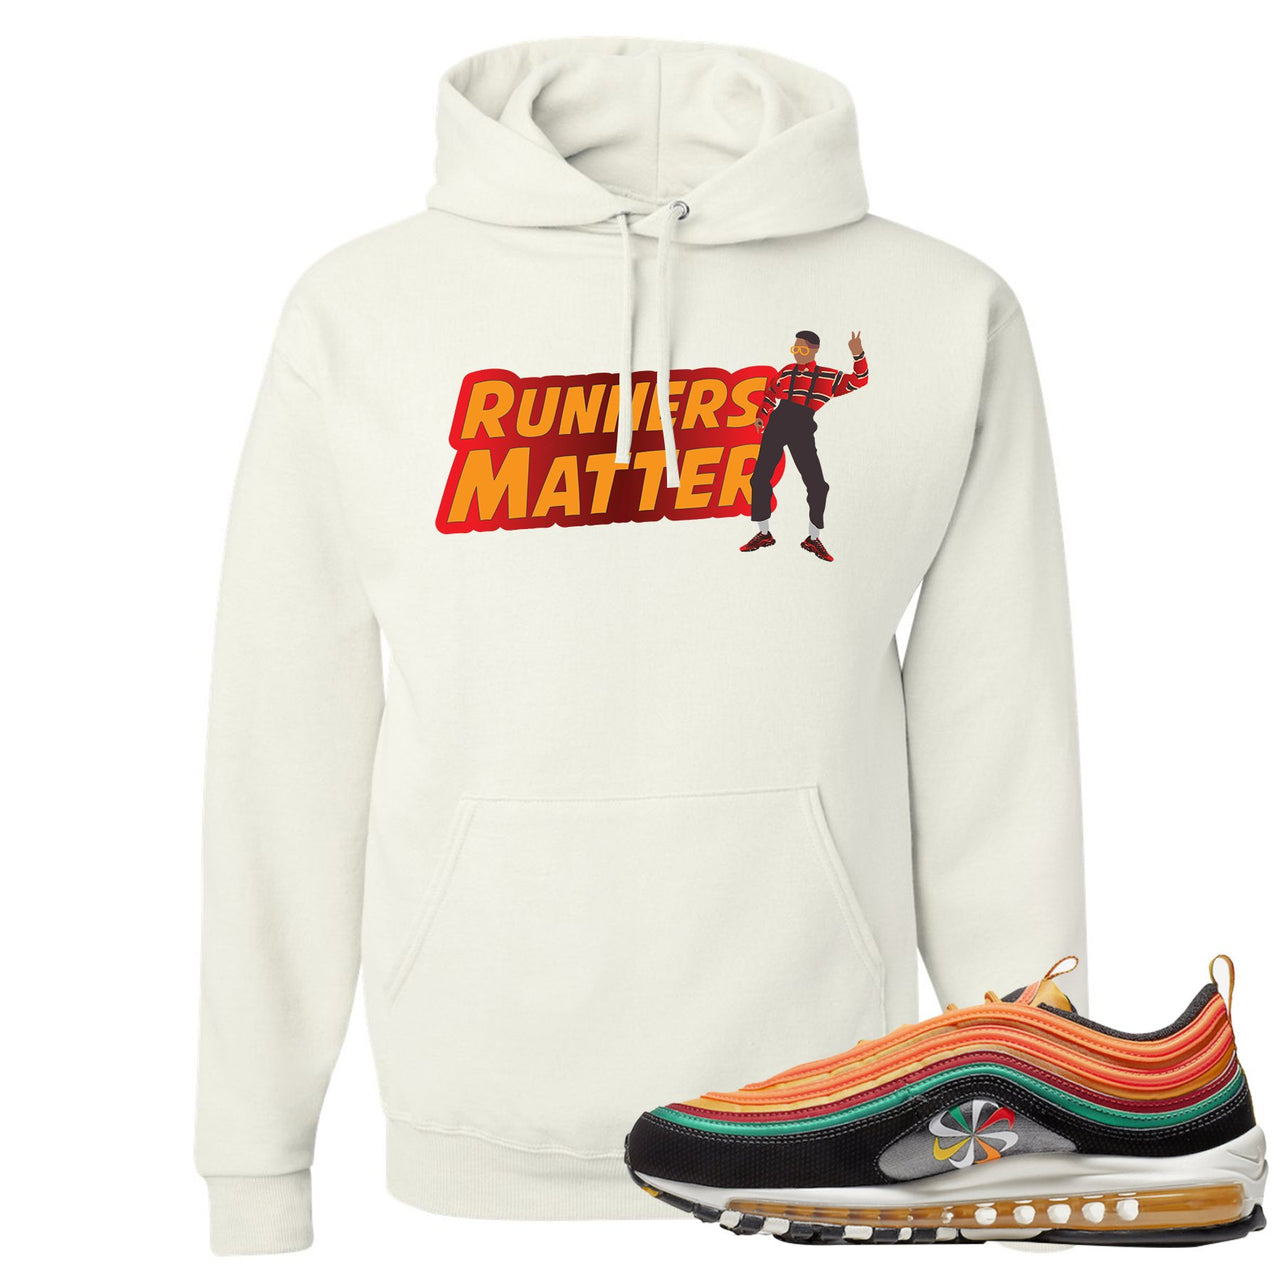 Printed on the front of the Air Max 97 Sunburst white sneaker matching pullover hoodie is the Runners Matter logo